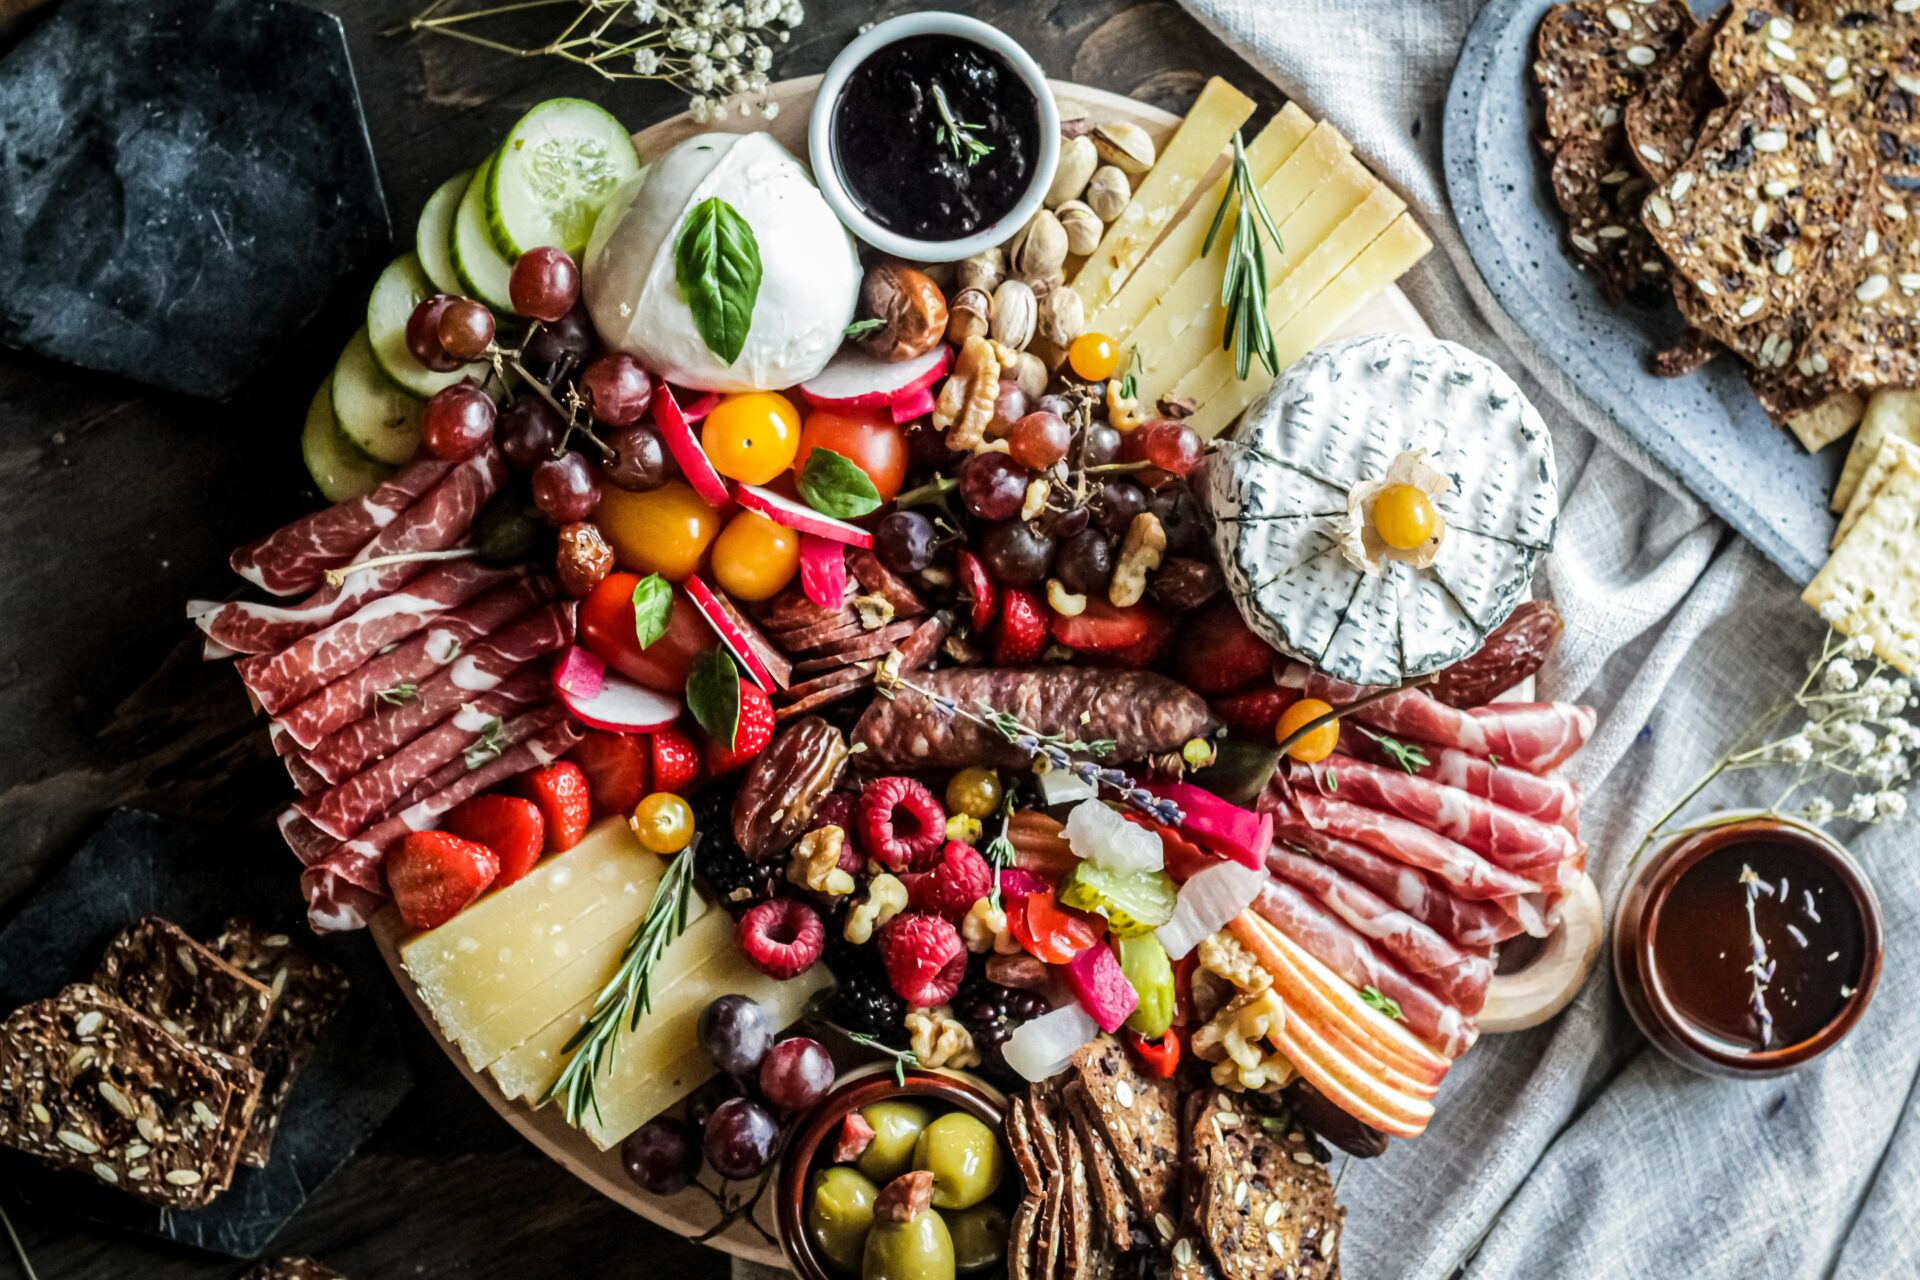 Charcuterie board with cheese, meats and fruit